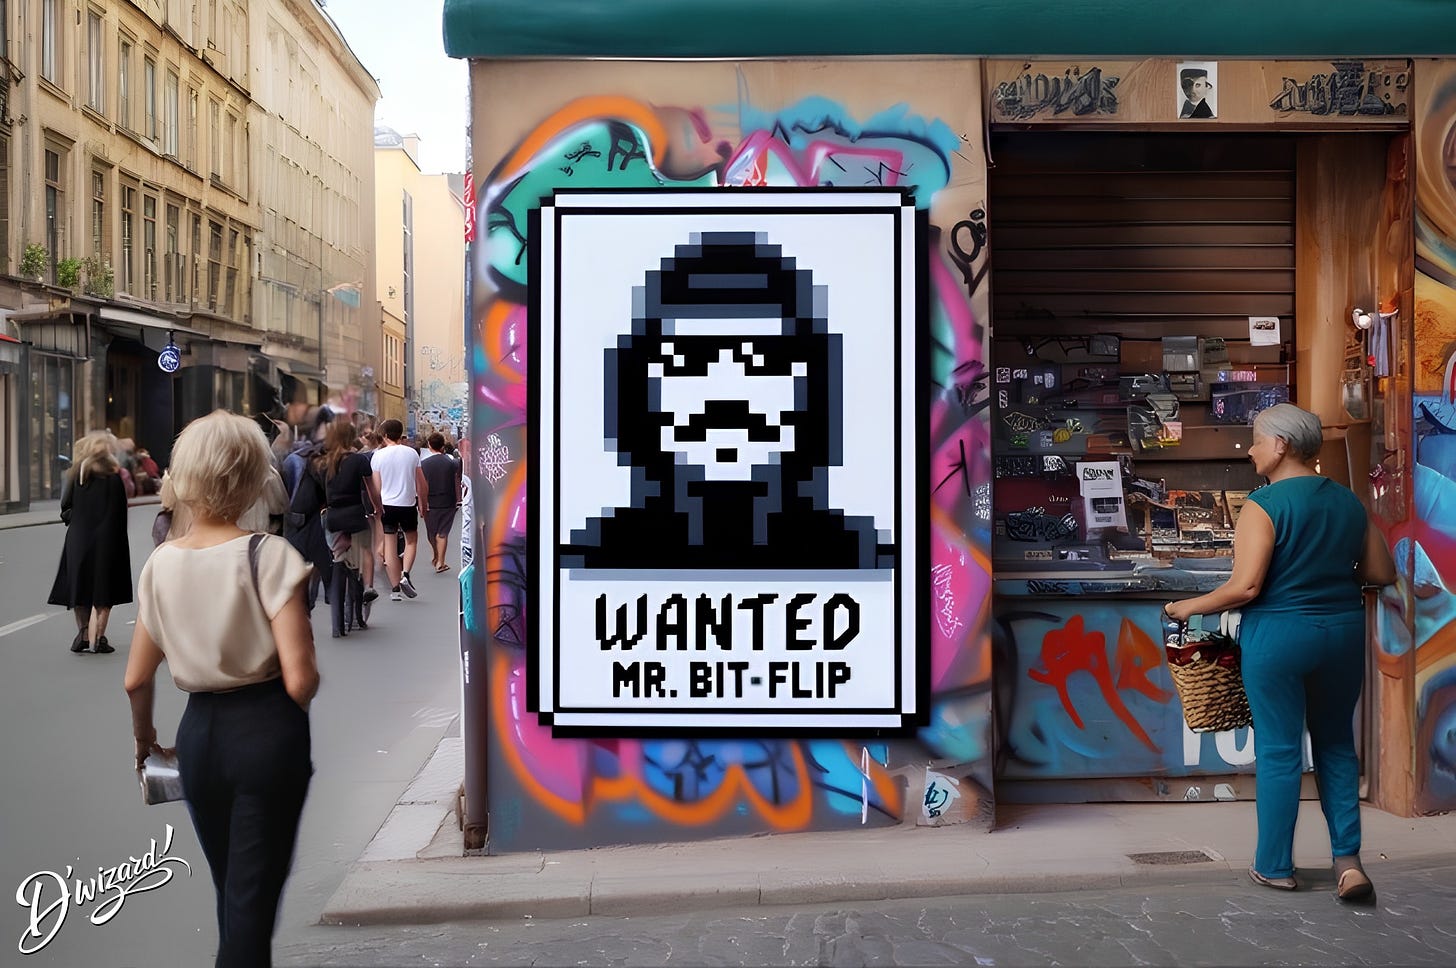 WANTED DEAD OR PIXELATED FOR FLAGRANT ACTS OF FLIPPANCY